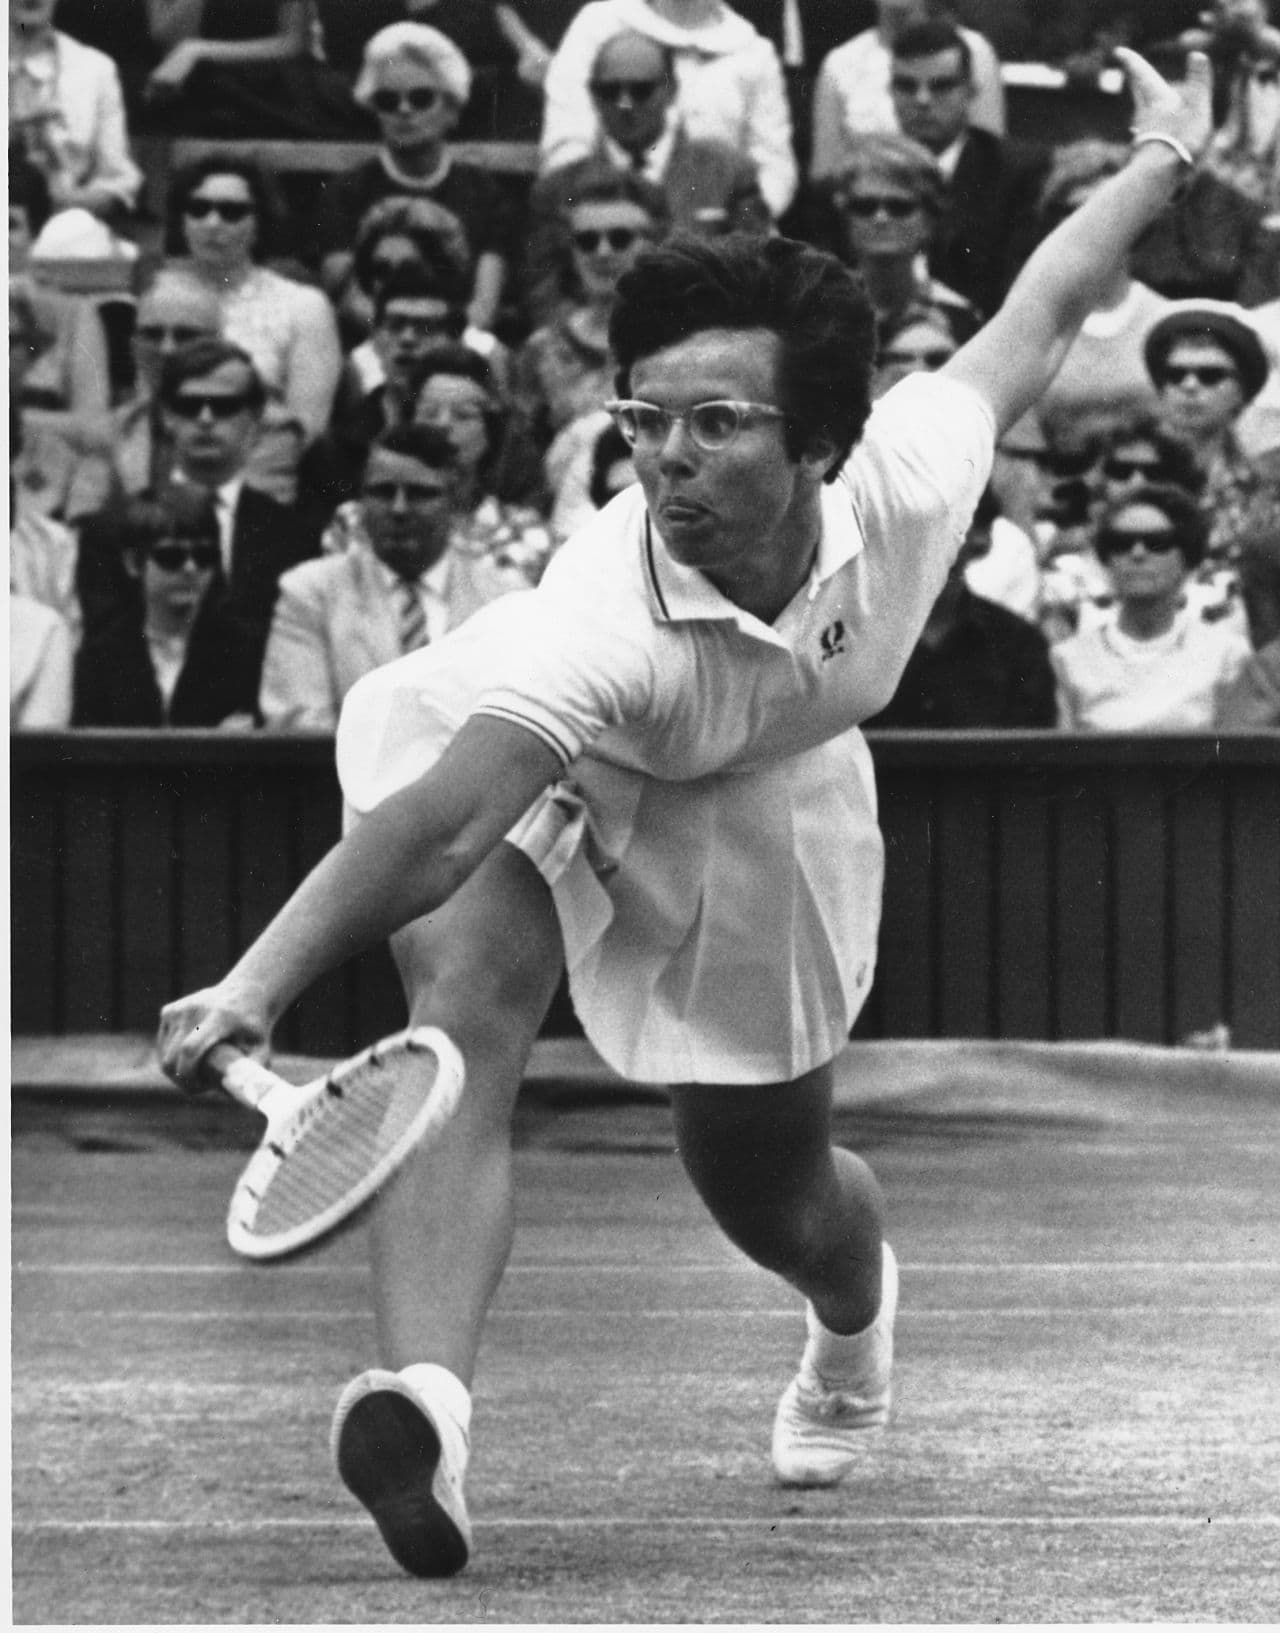 U.S. tennis player Billie Jean King returns the ball to volley against Ann Haydon Jones during the Women singles match of the All England Lawn Championships at Wimbledon in London on July 4, 1968. (AP)